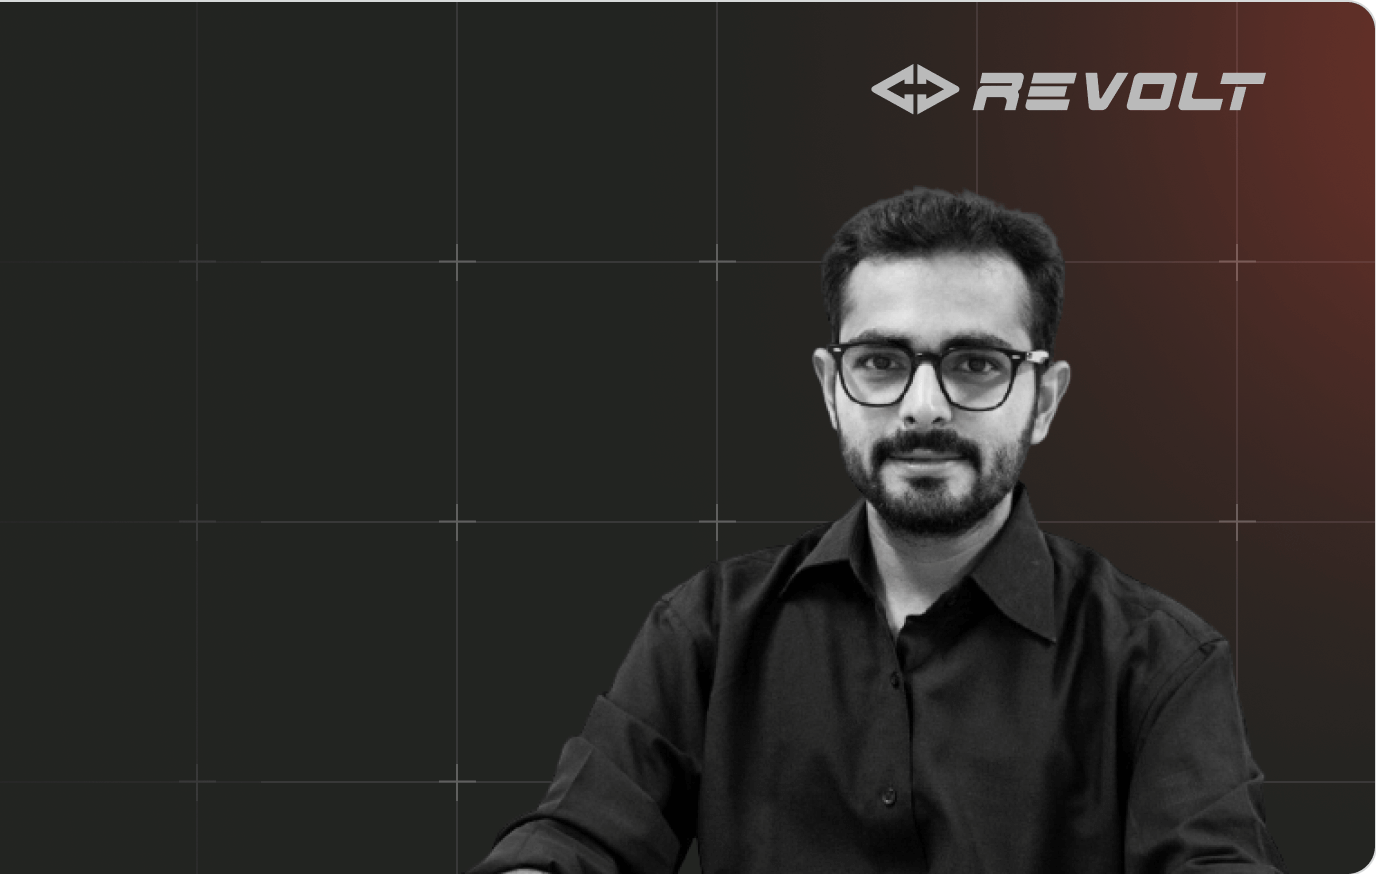 <a href="/art-of-designing-shivam-sharma/">We discussed the process of building India's first electric bike where he shared his personal design journey and approach to achieving world-class design processes.</a>